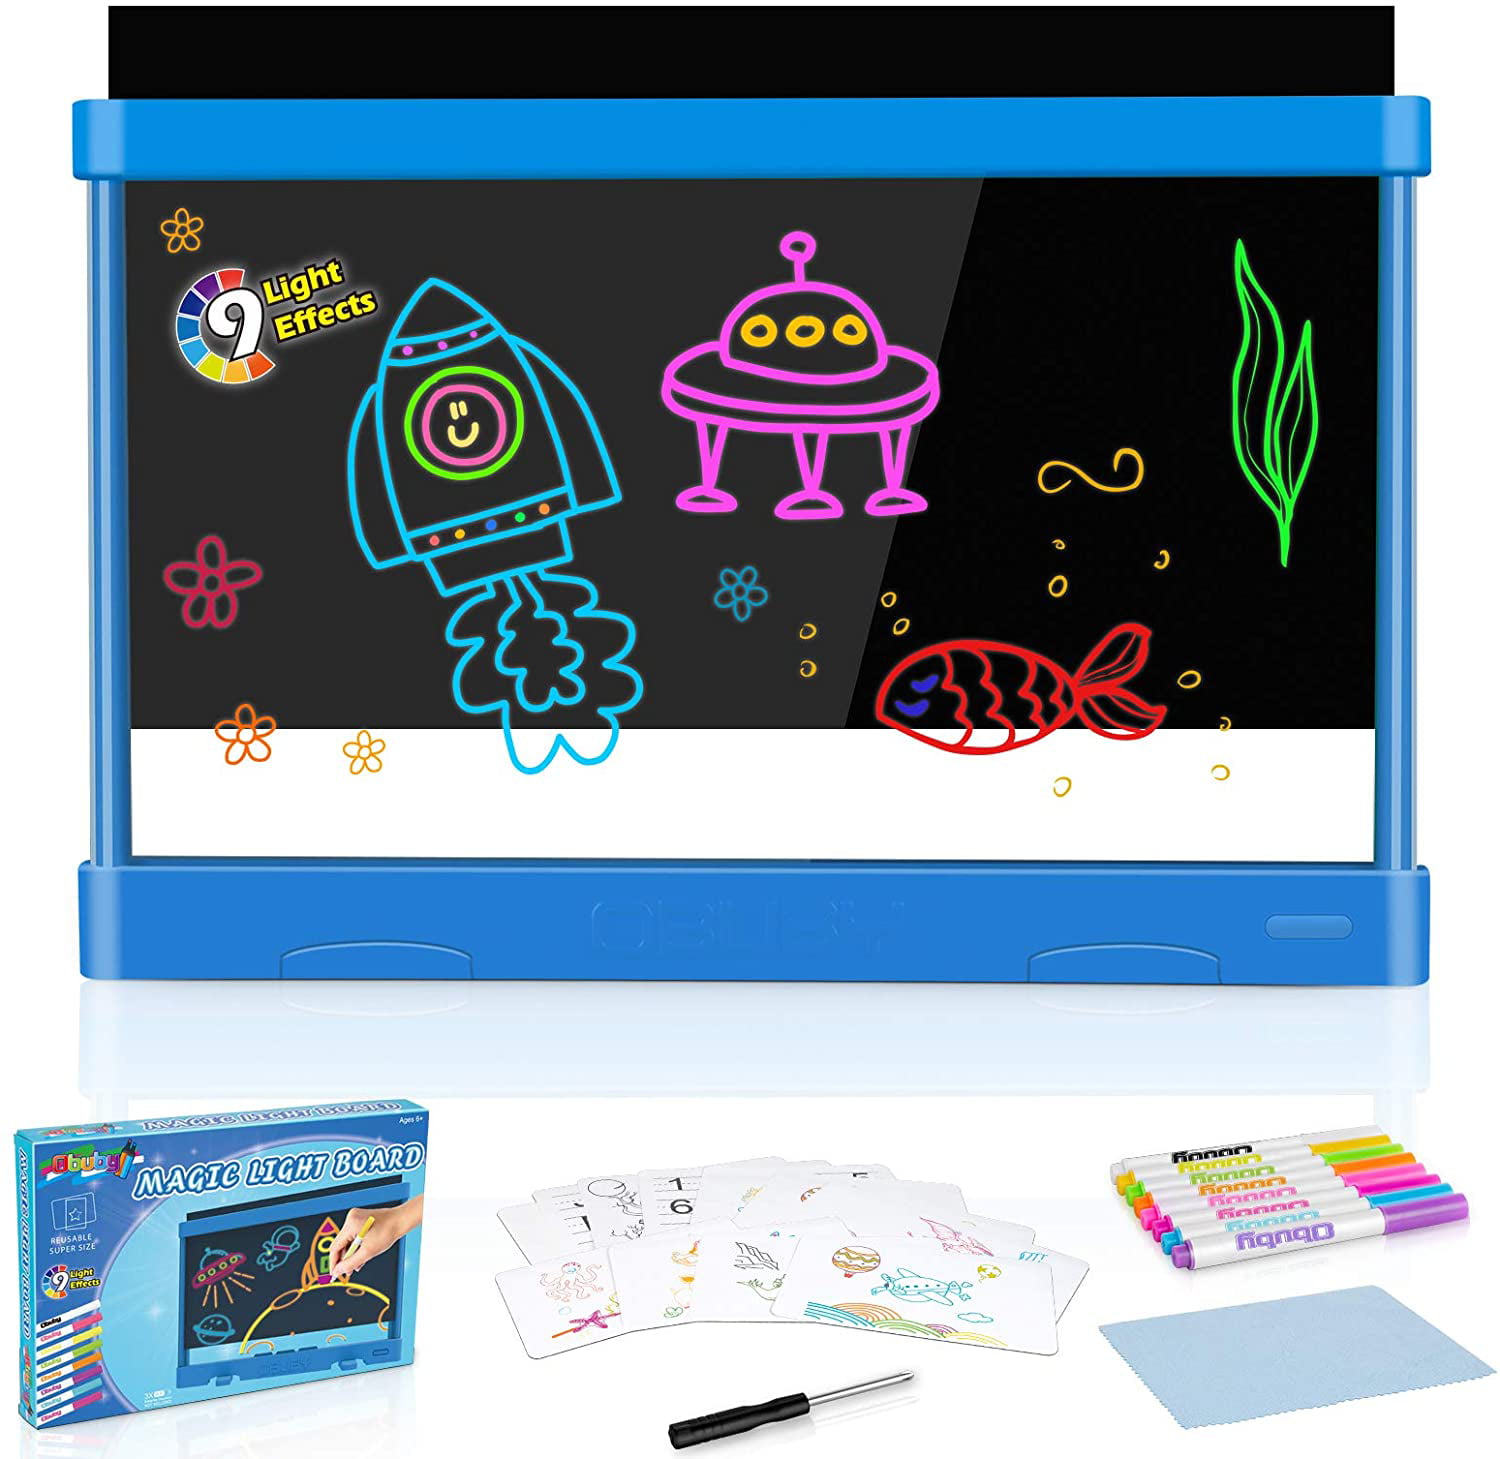 Sensory LED Drawing Board Kid's Writing Toy Autism ADHD Light Up Christmas Gift 